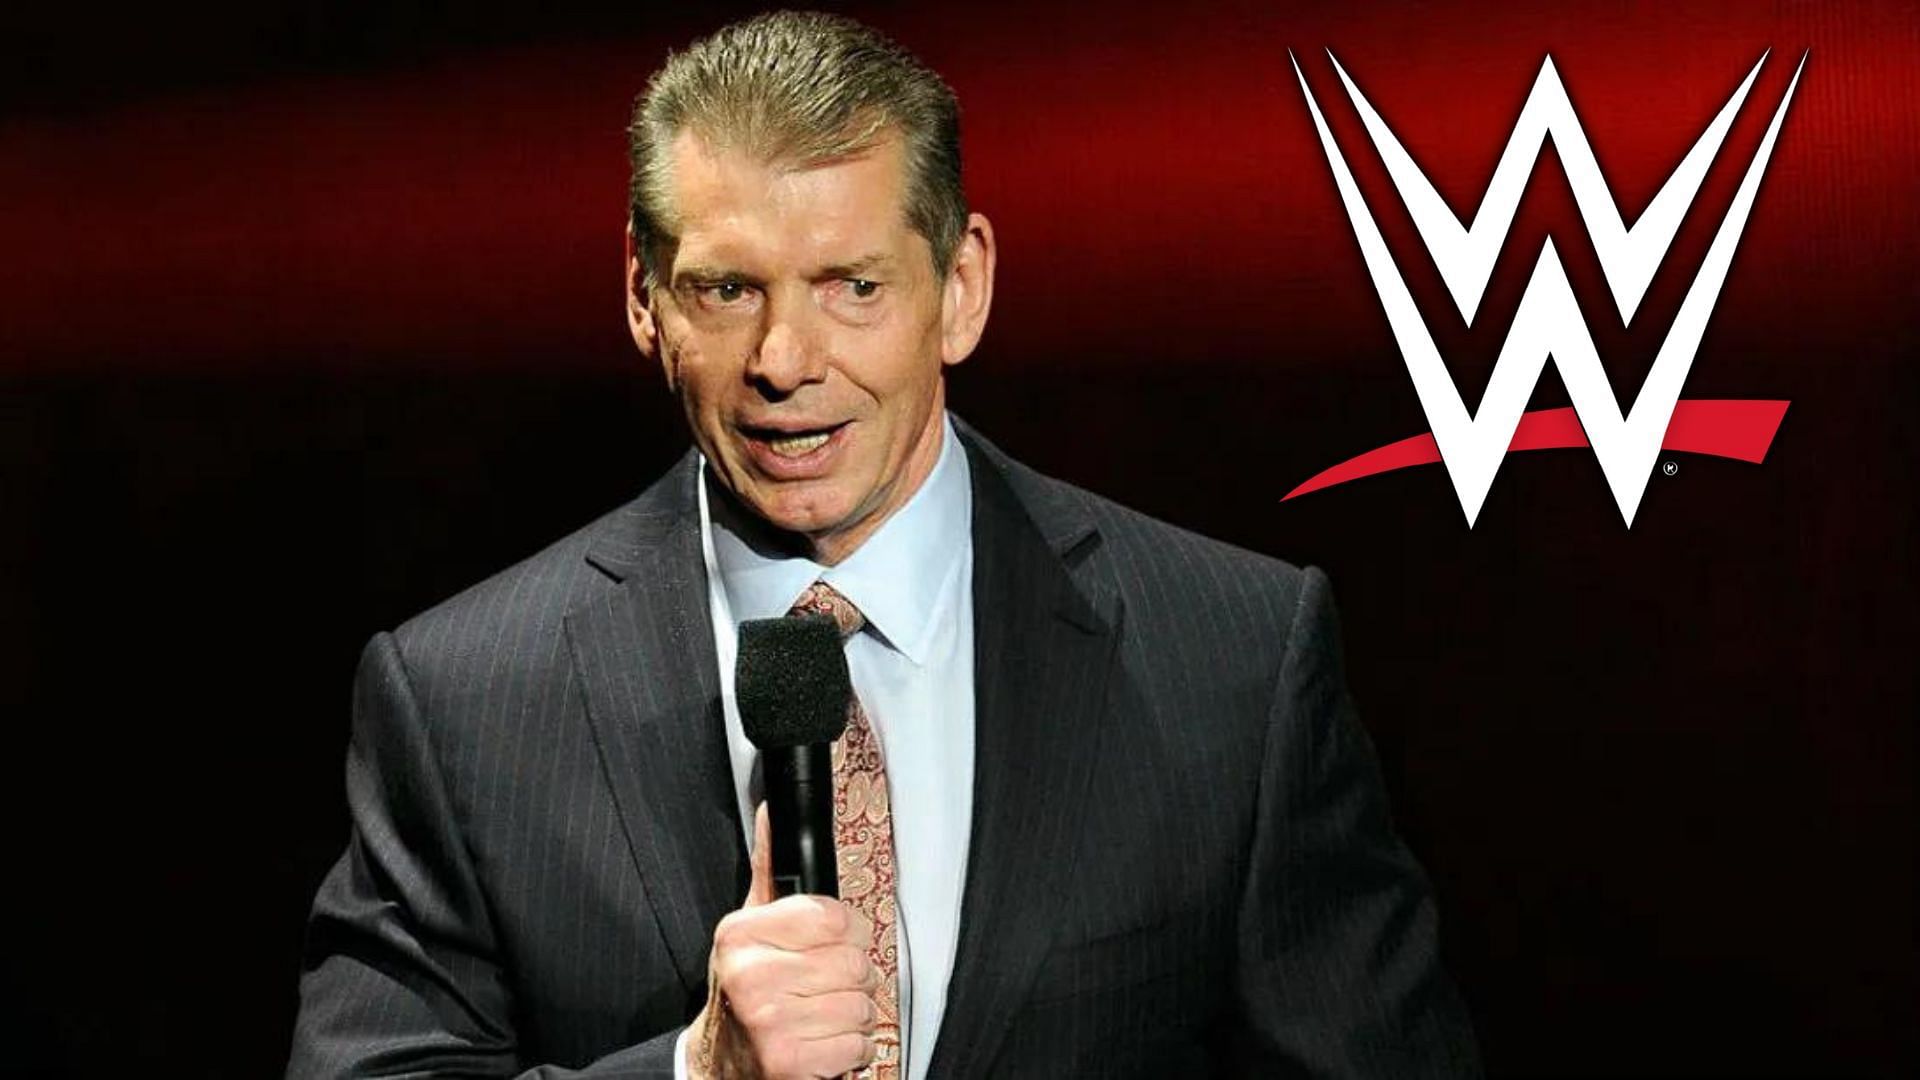 Vince McMahon is currently the Executive Chairman of TKO Group Holdings